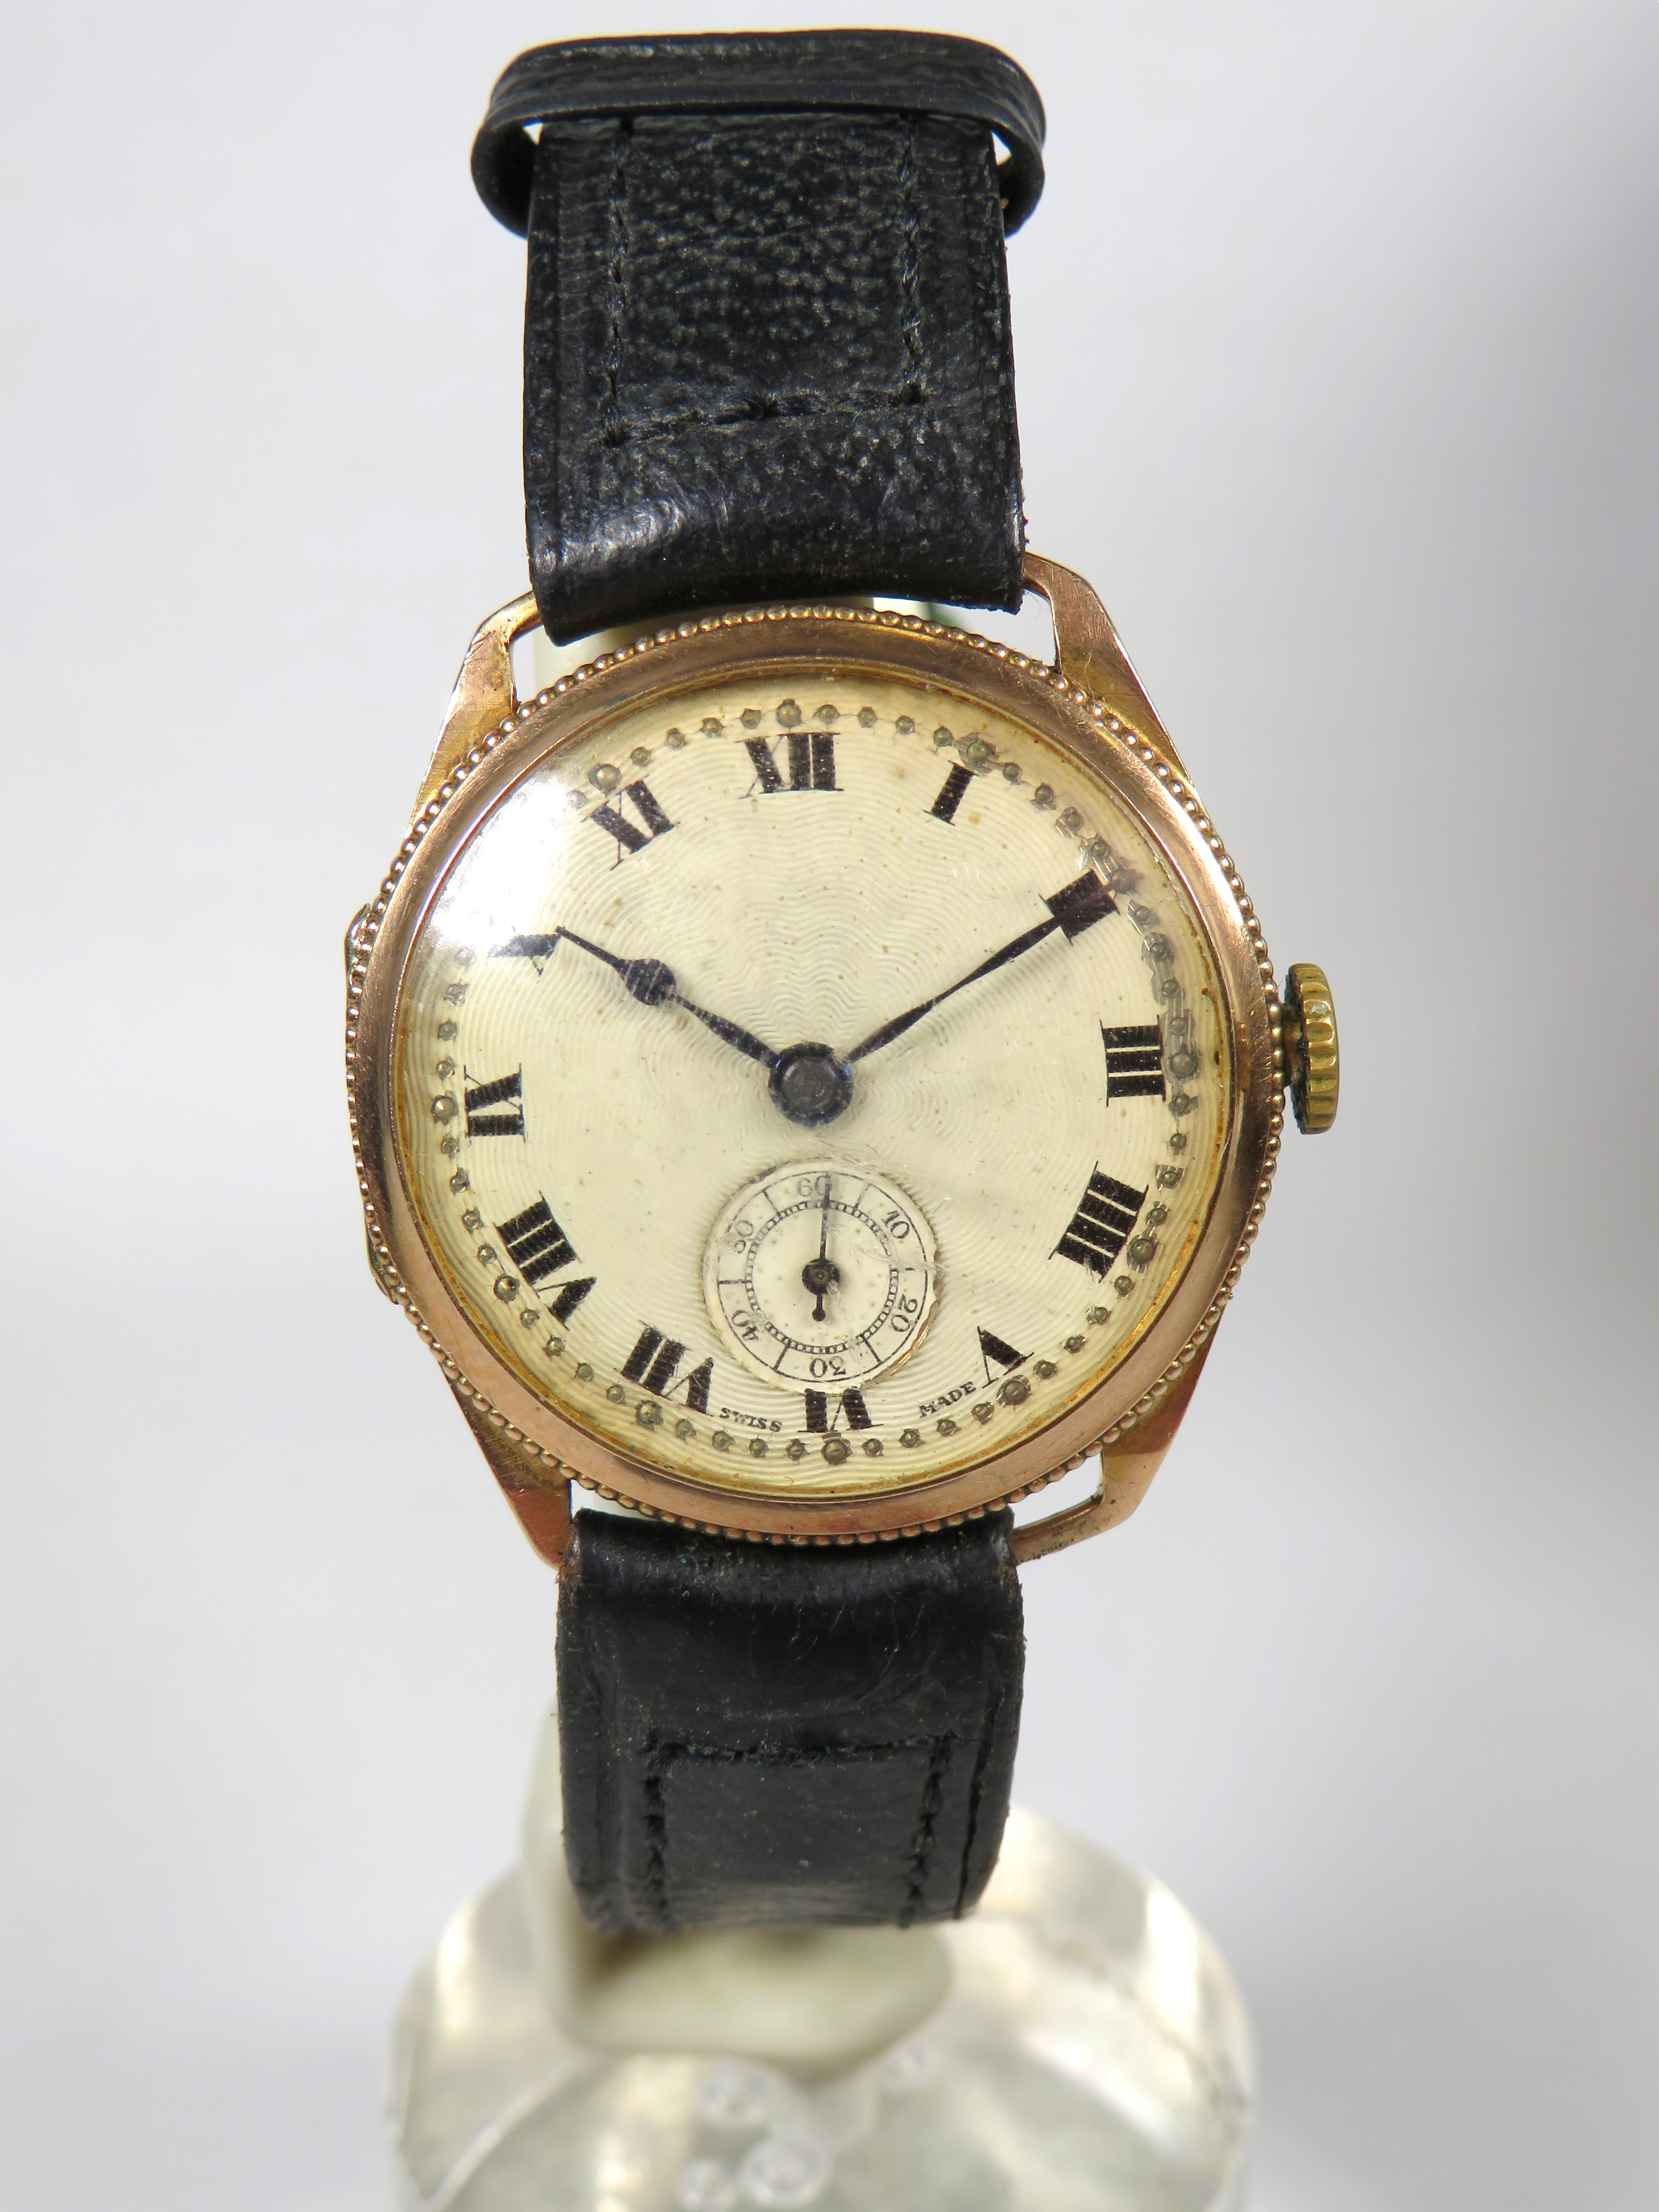 Swiss made 15 Jewel watch with leather strap, Subsidary dial. 9ct Case & Bezel.  Non runner for spar